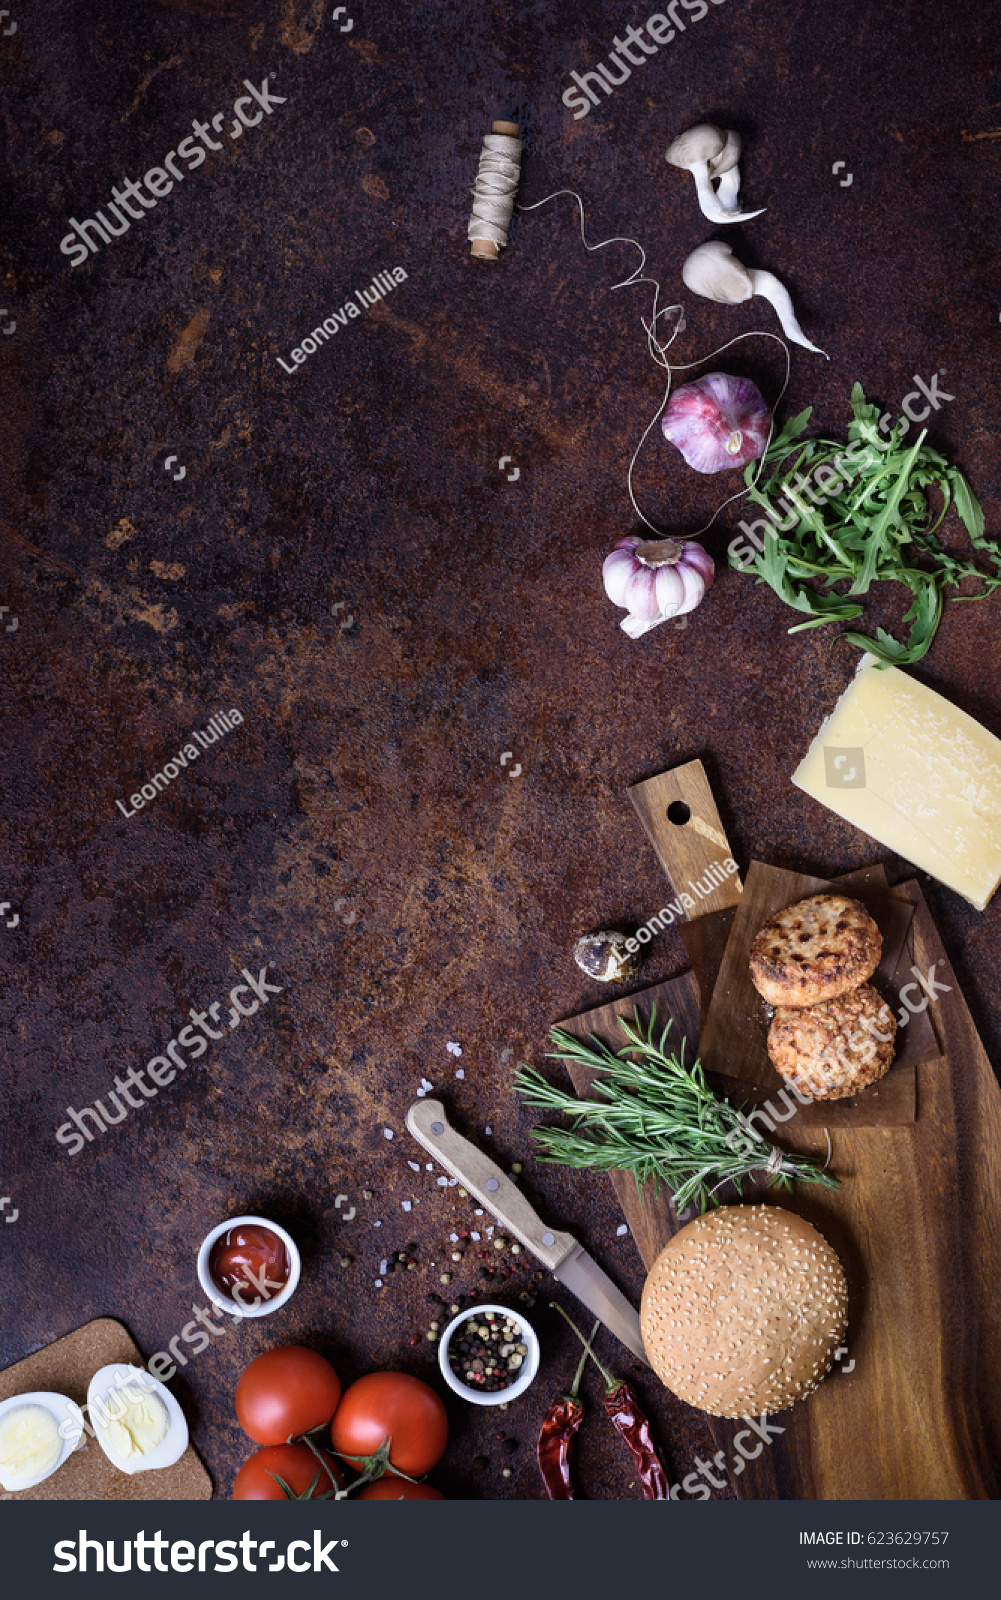 Burger with meat, cheese and fresh vegetables. On a wooden board. Top view, copy space. #623629757